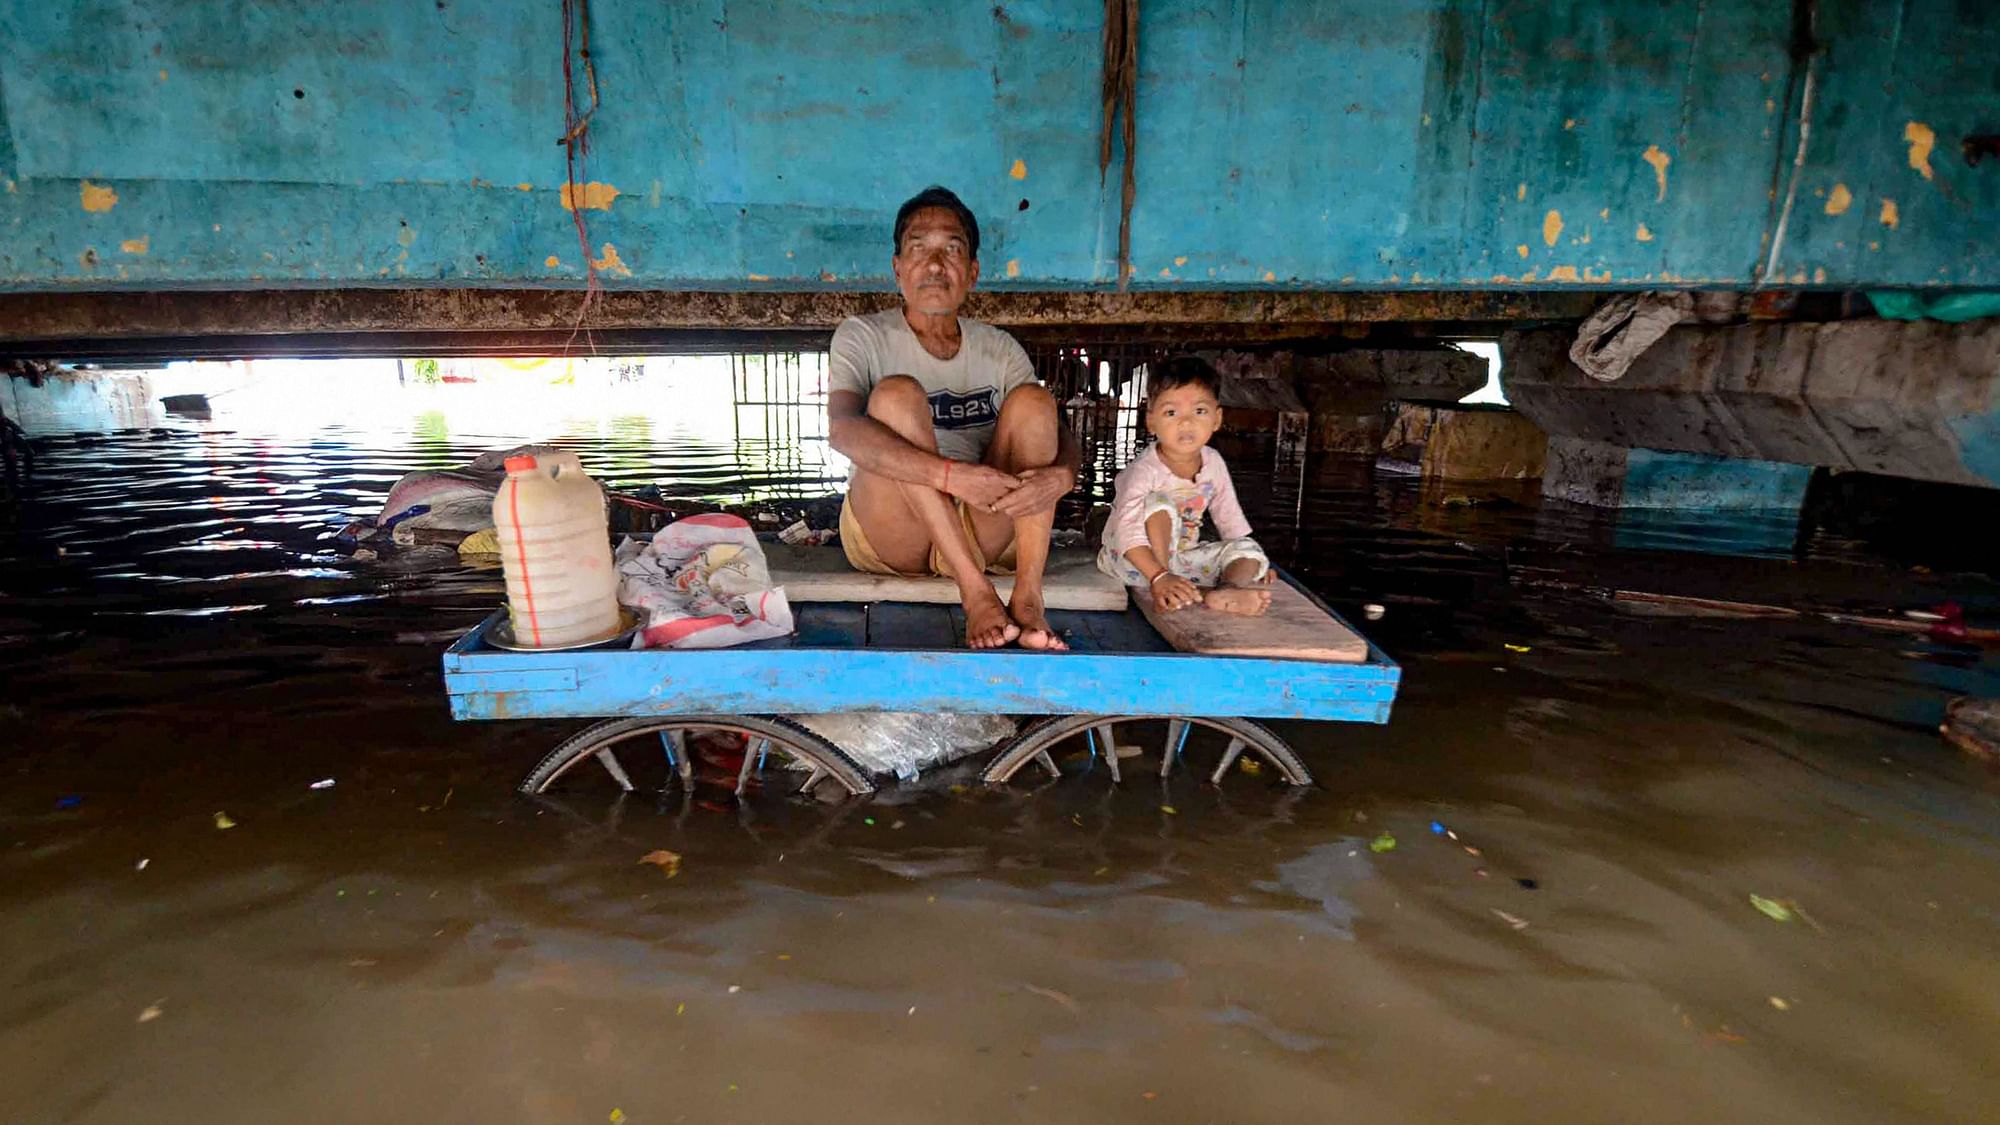 A person sits with a child on a cart in an area affected by waterlogging following heavy monsoon rainfall in Patna on Monday, 30 September.